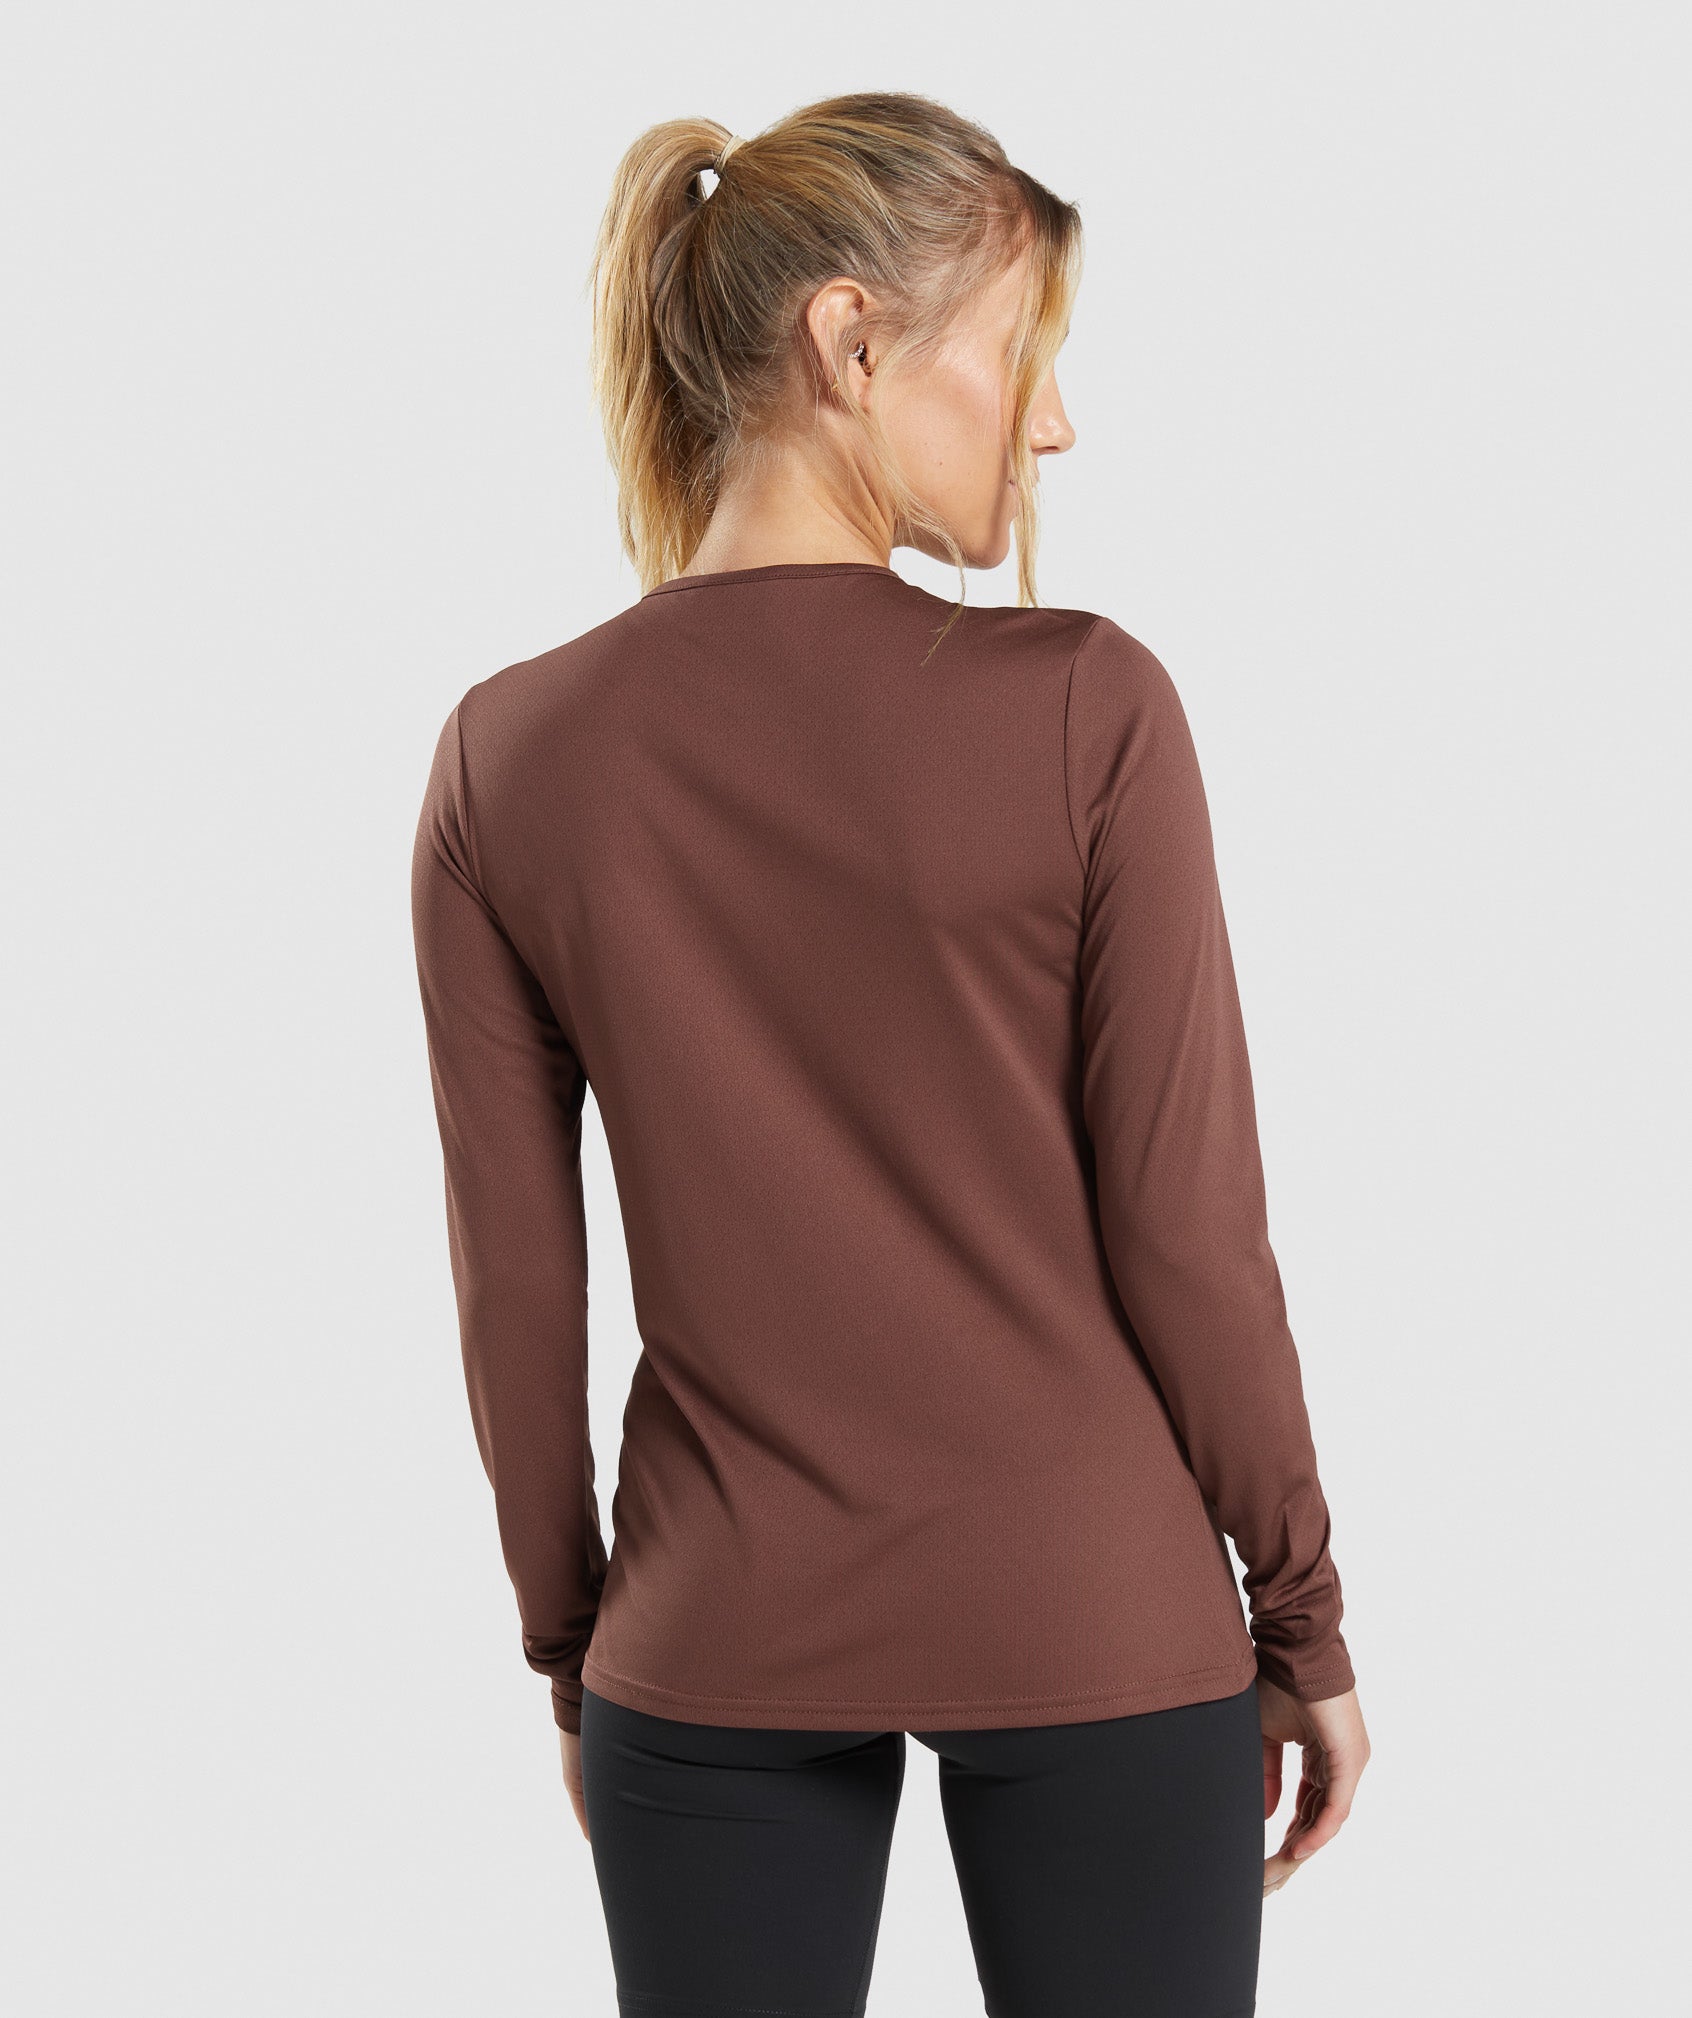 Training Long Sleeve Top in Cherry Brown - view 2